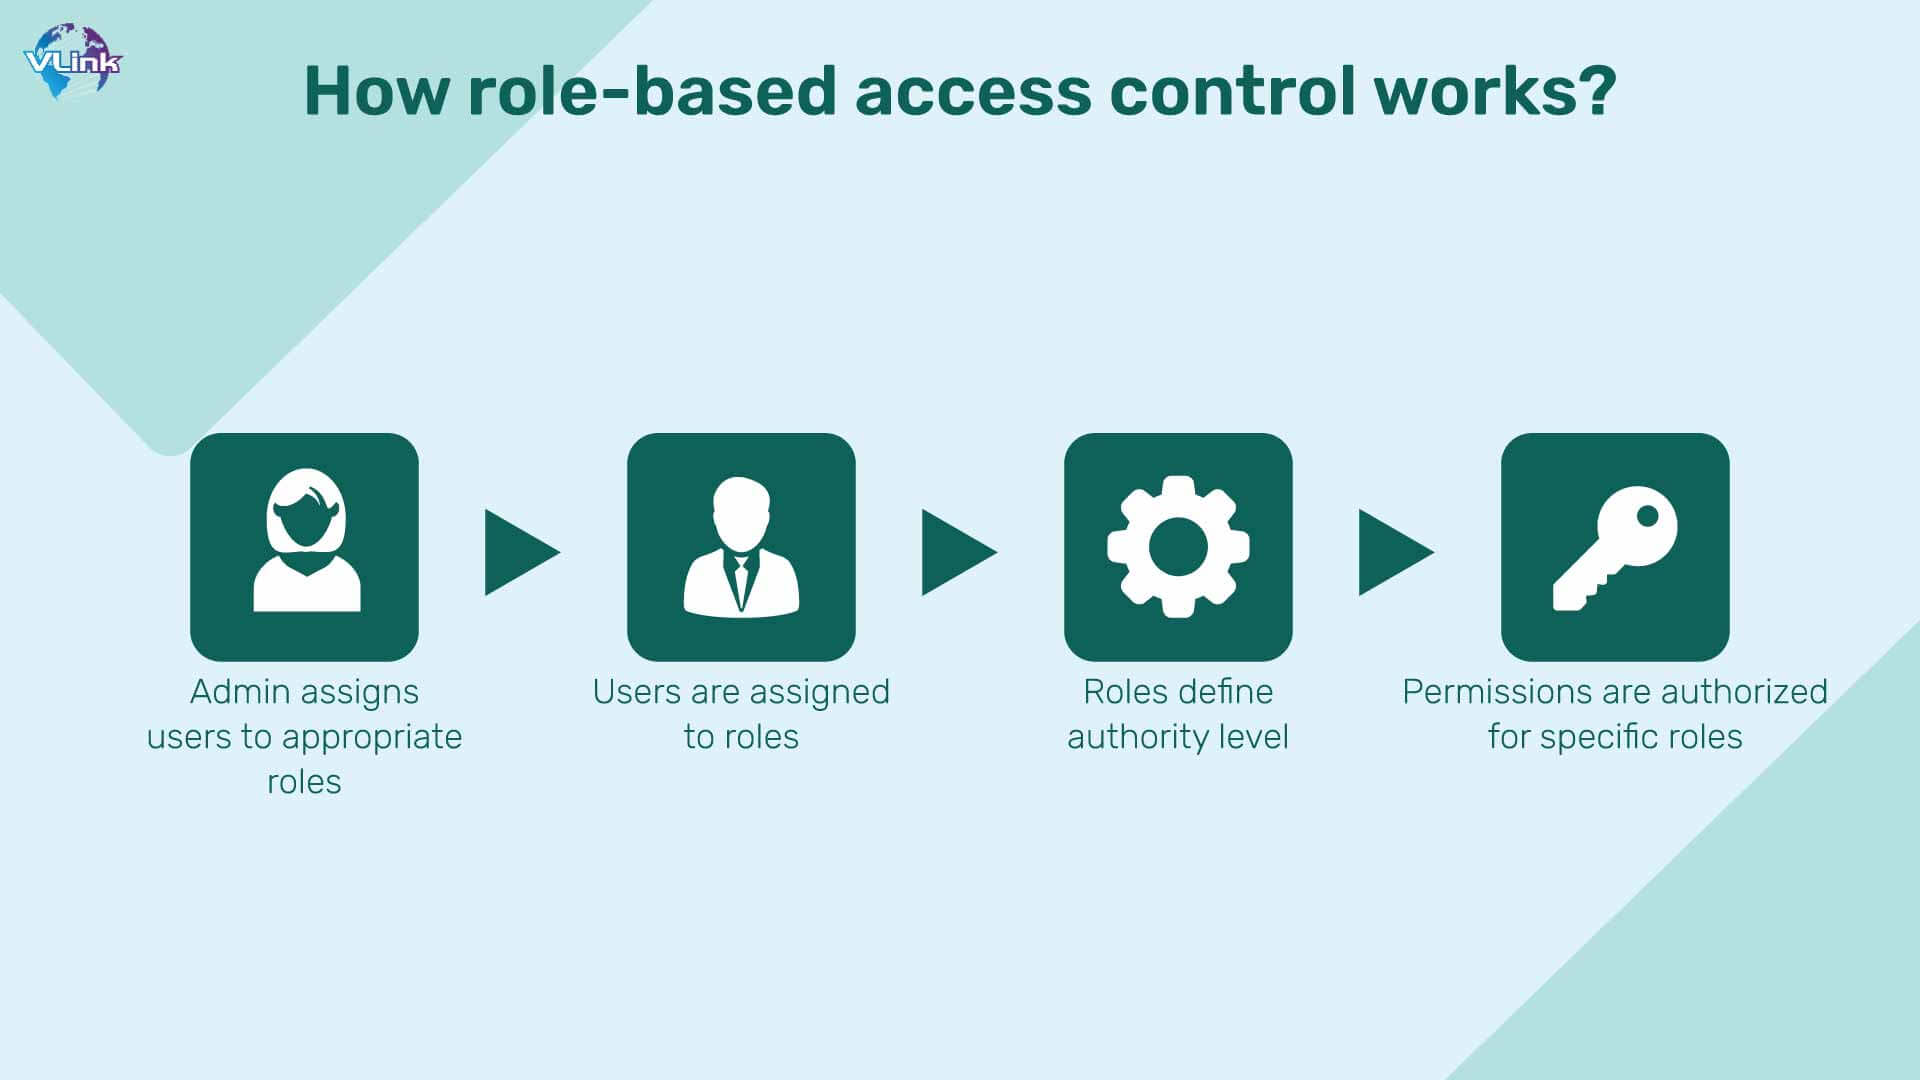 How role-based access control works